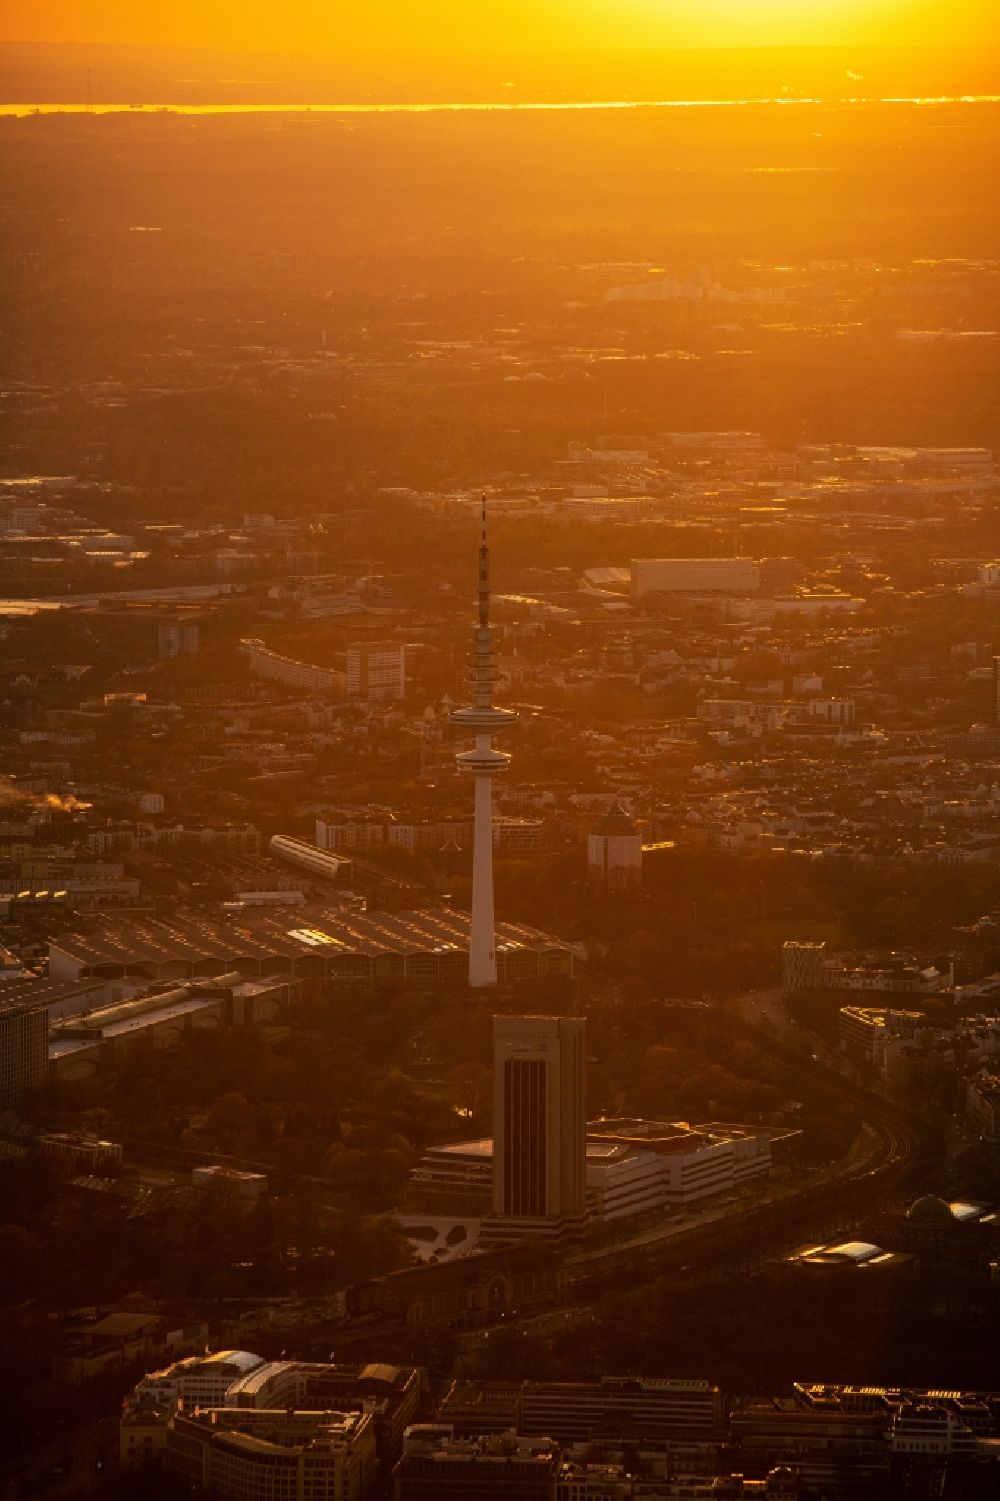 Hamburg from above - Sunset TV tower Heinrich-Hertz-Turm at the exhibition center in Hamburg. The structure used as a telecommunications tower and for broadcasting stations belongs to the Deutsche Funkturm GmbH